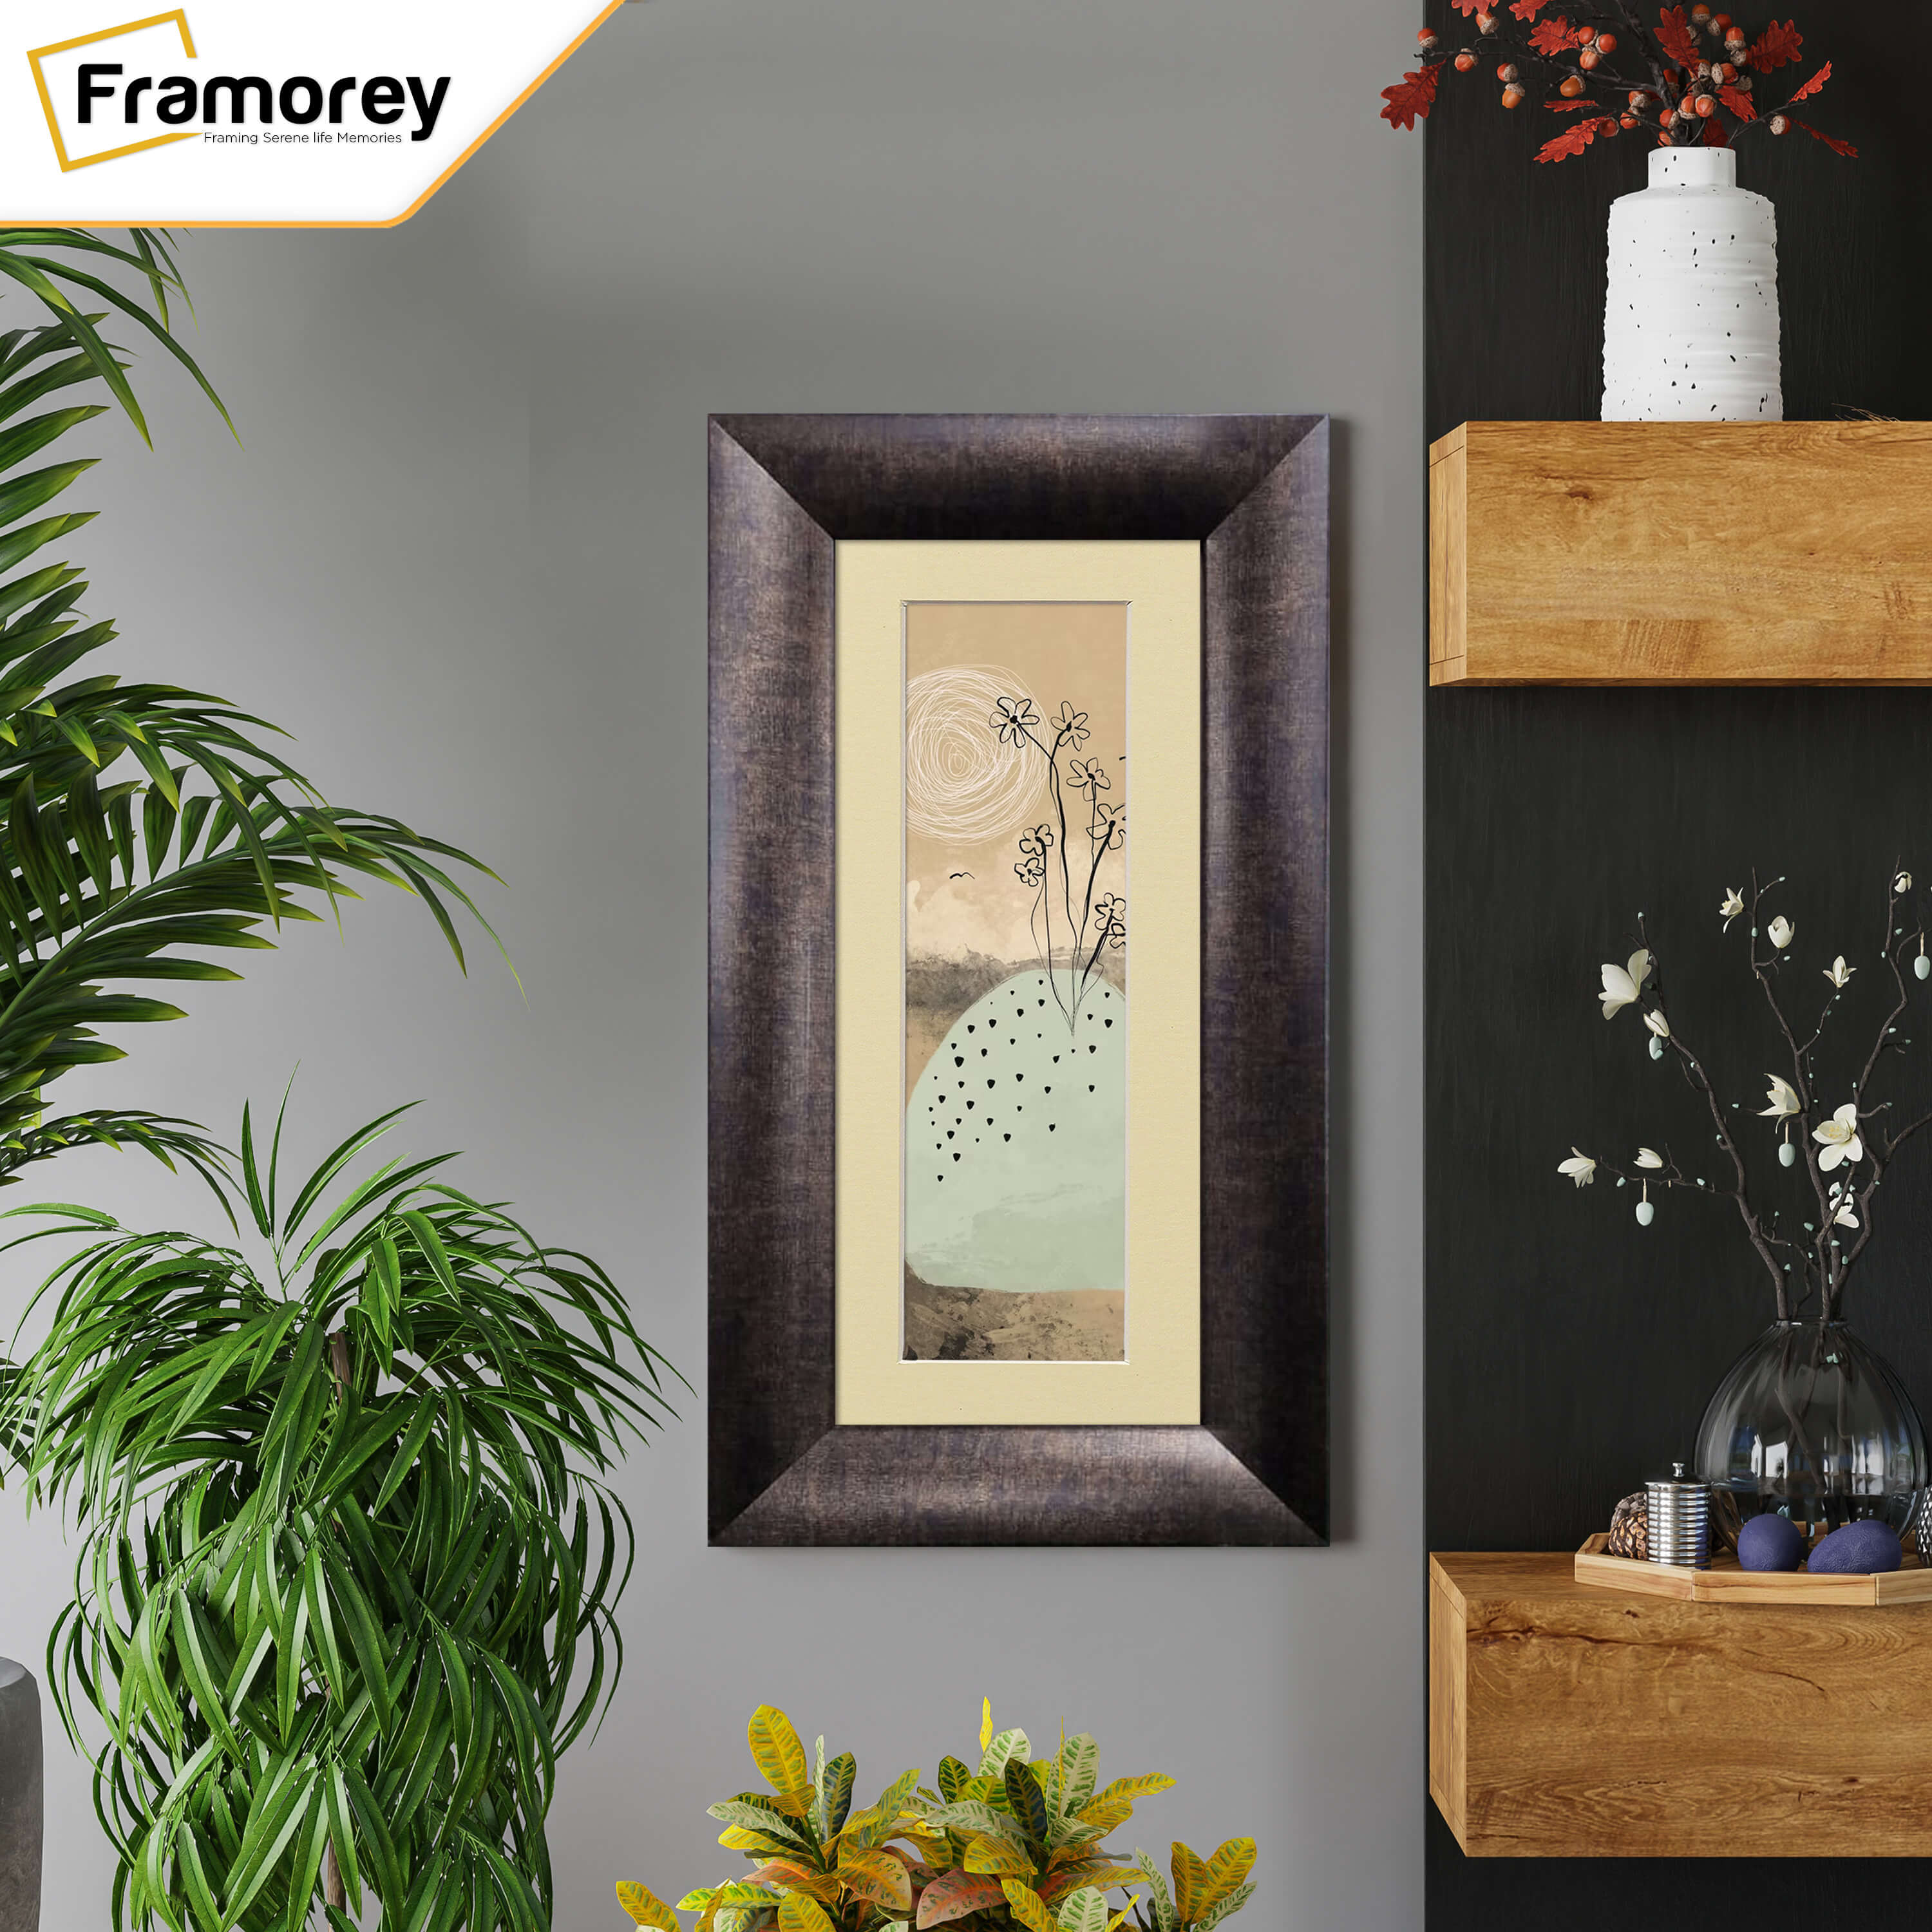 Panoramic Size Brushed Gold Engraved Frames Handmade Poster Frames With Ivory Mount